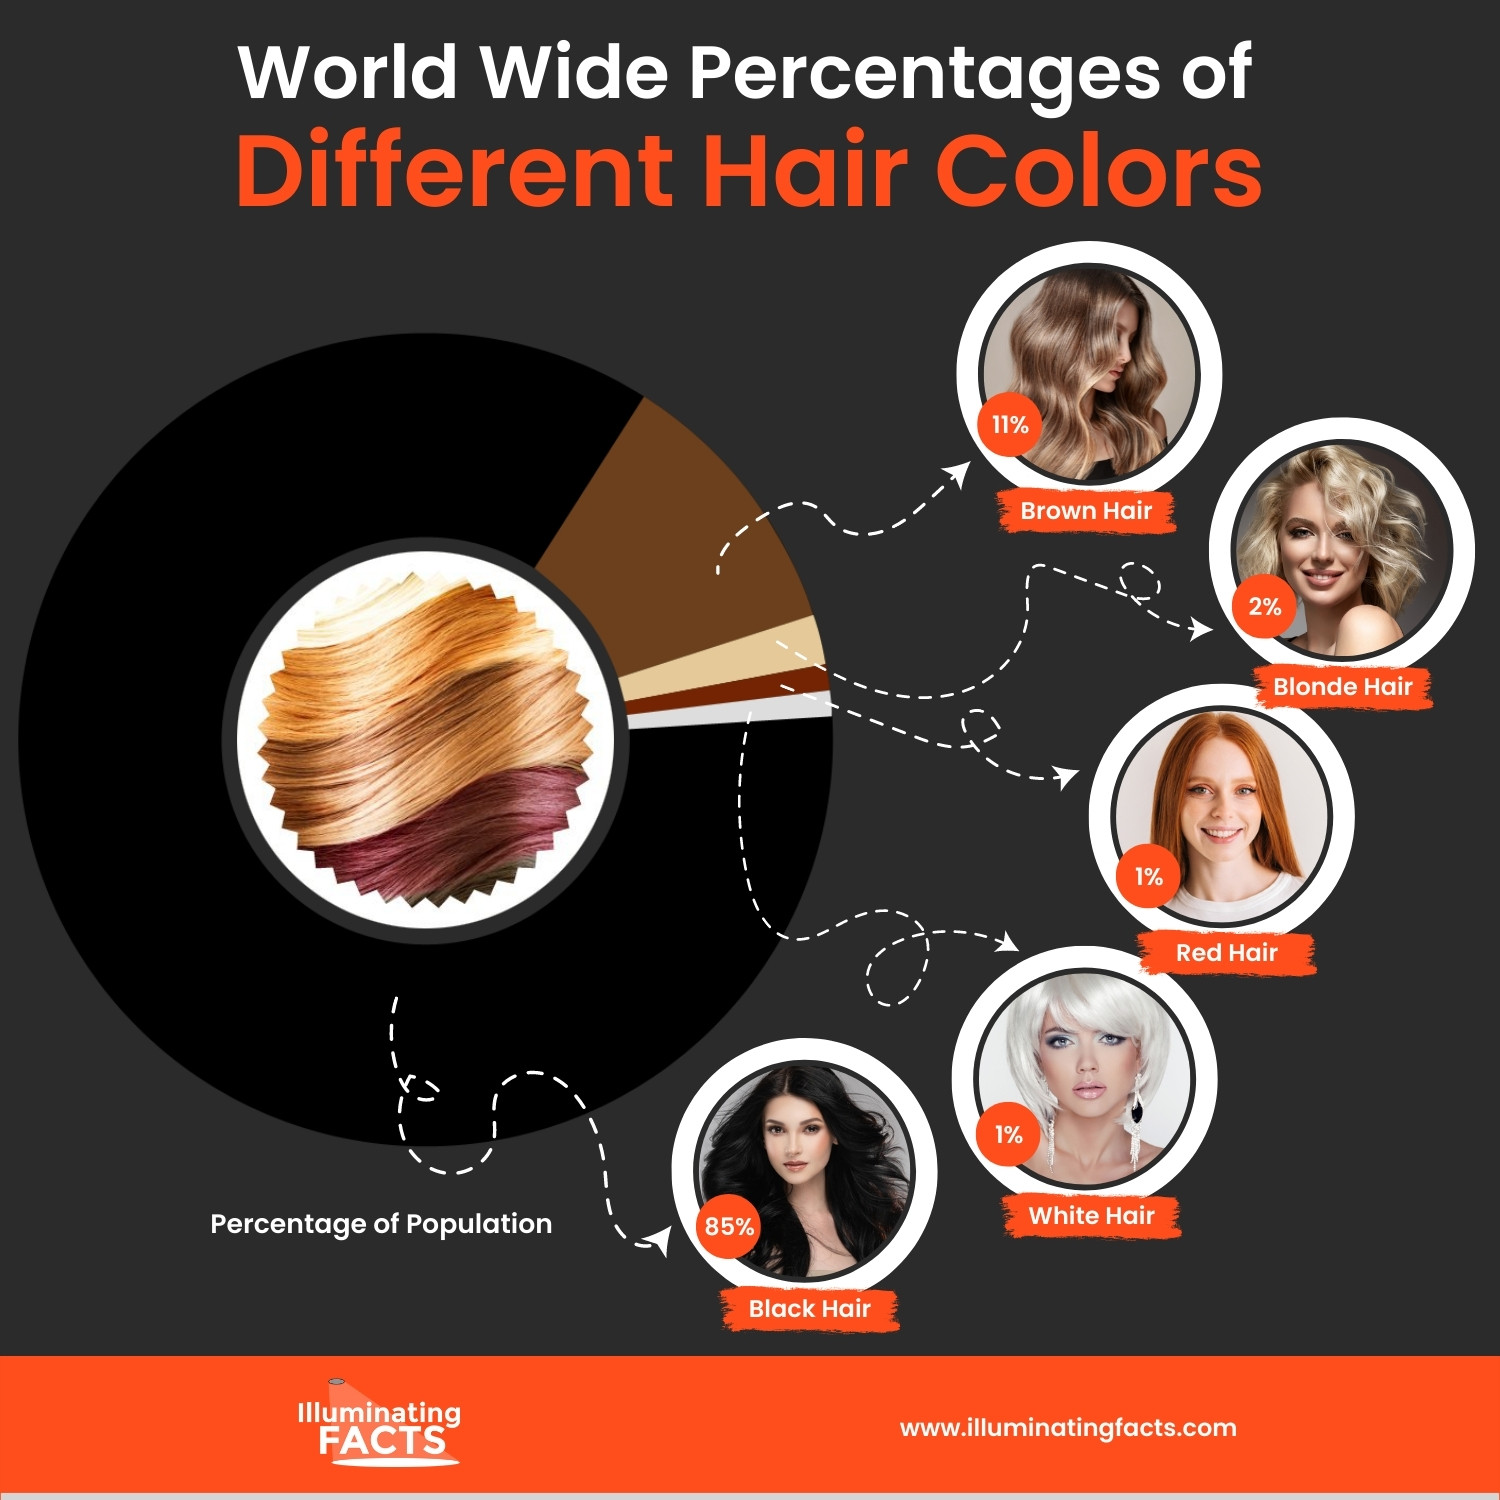 World Wide Percentages of Different Hair Colors